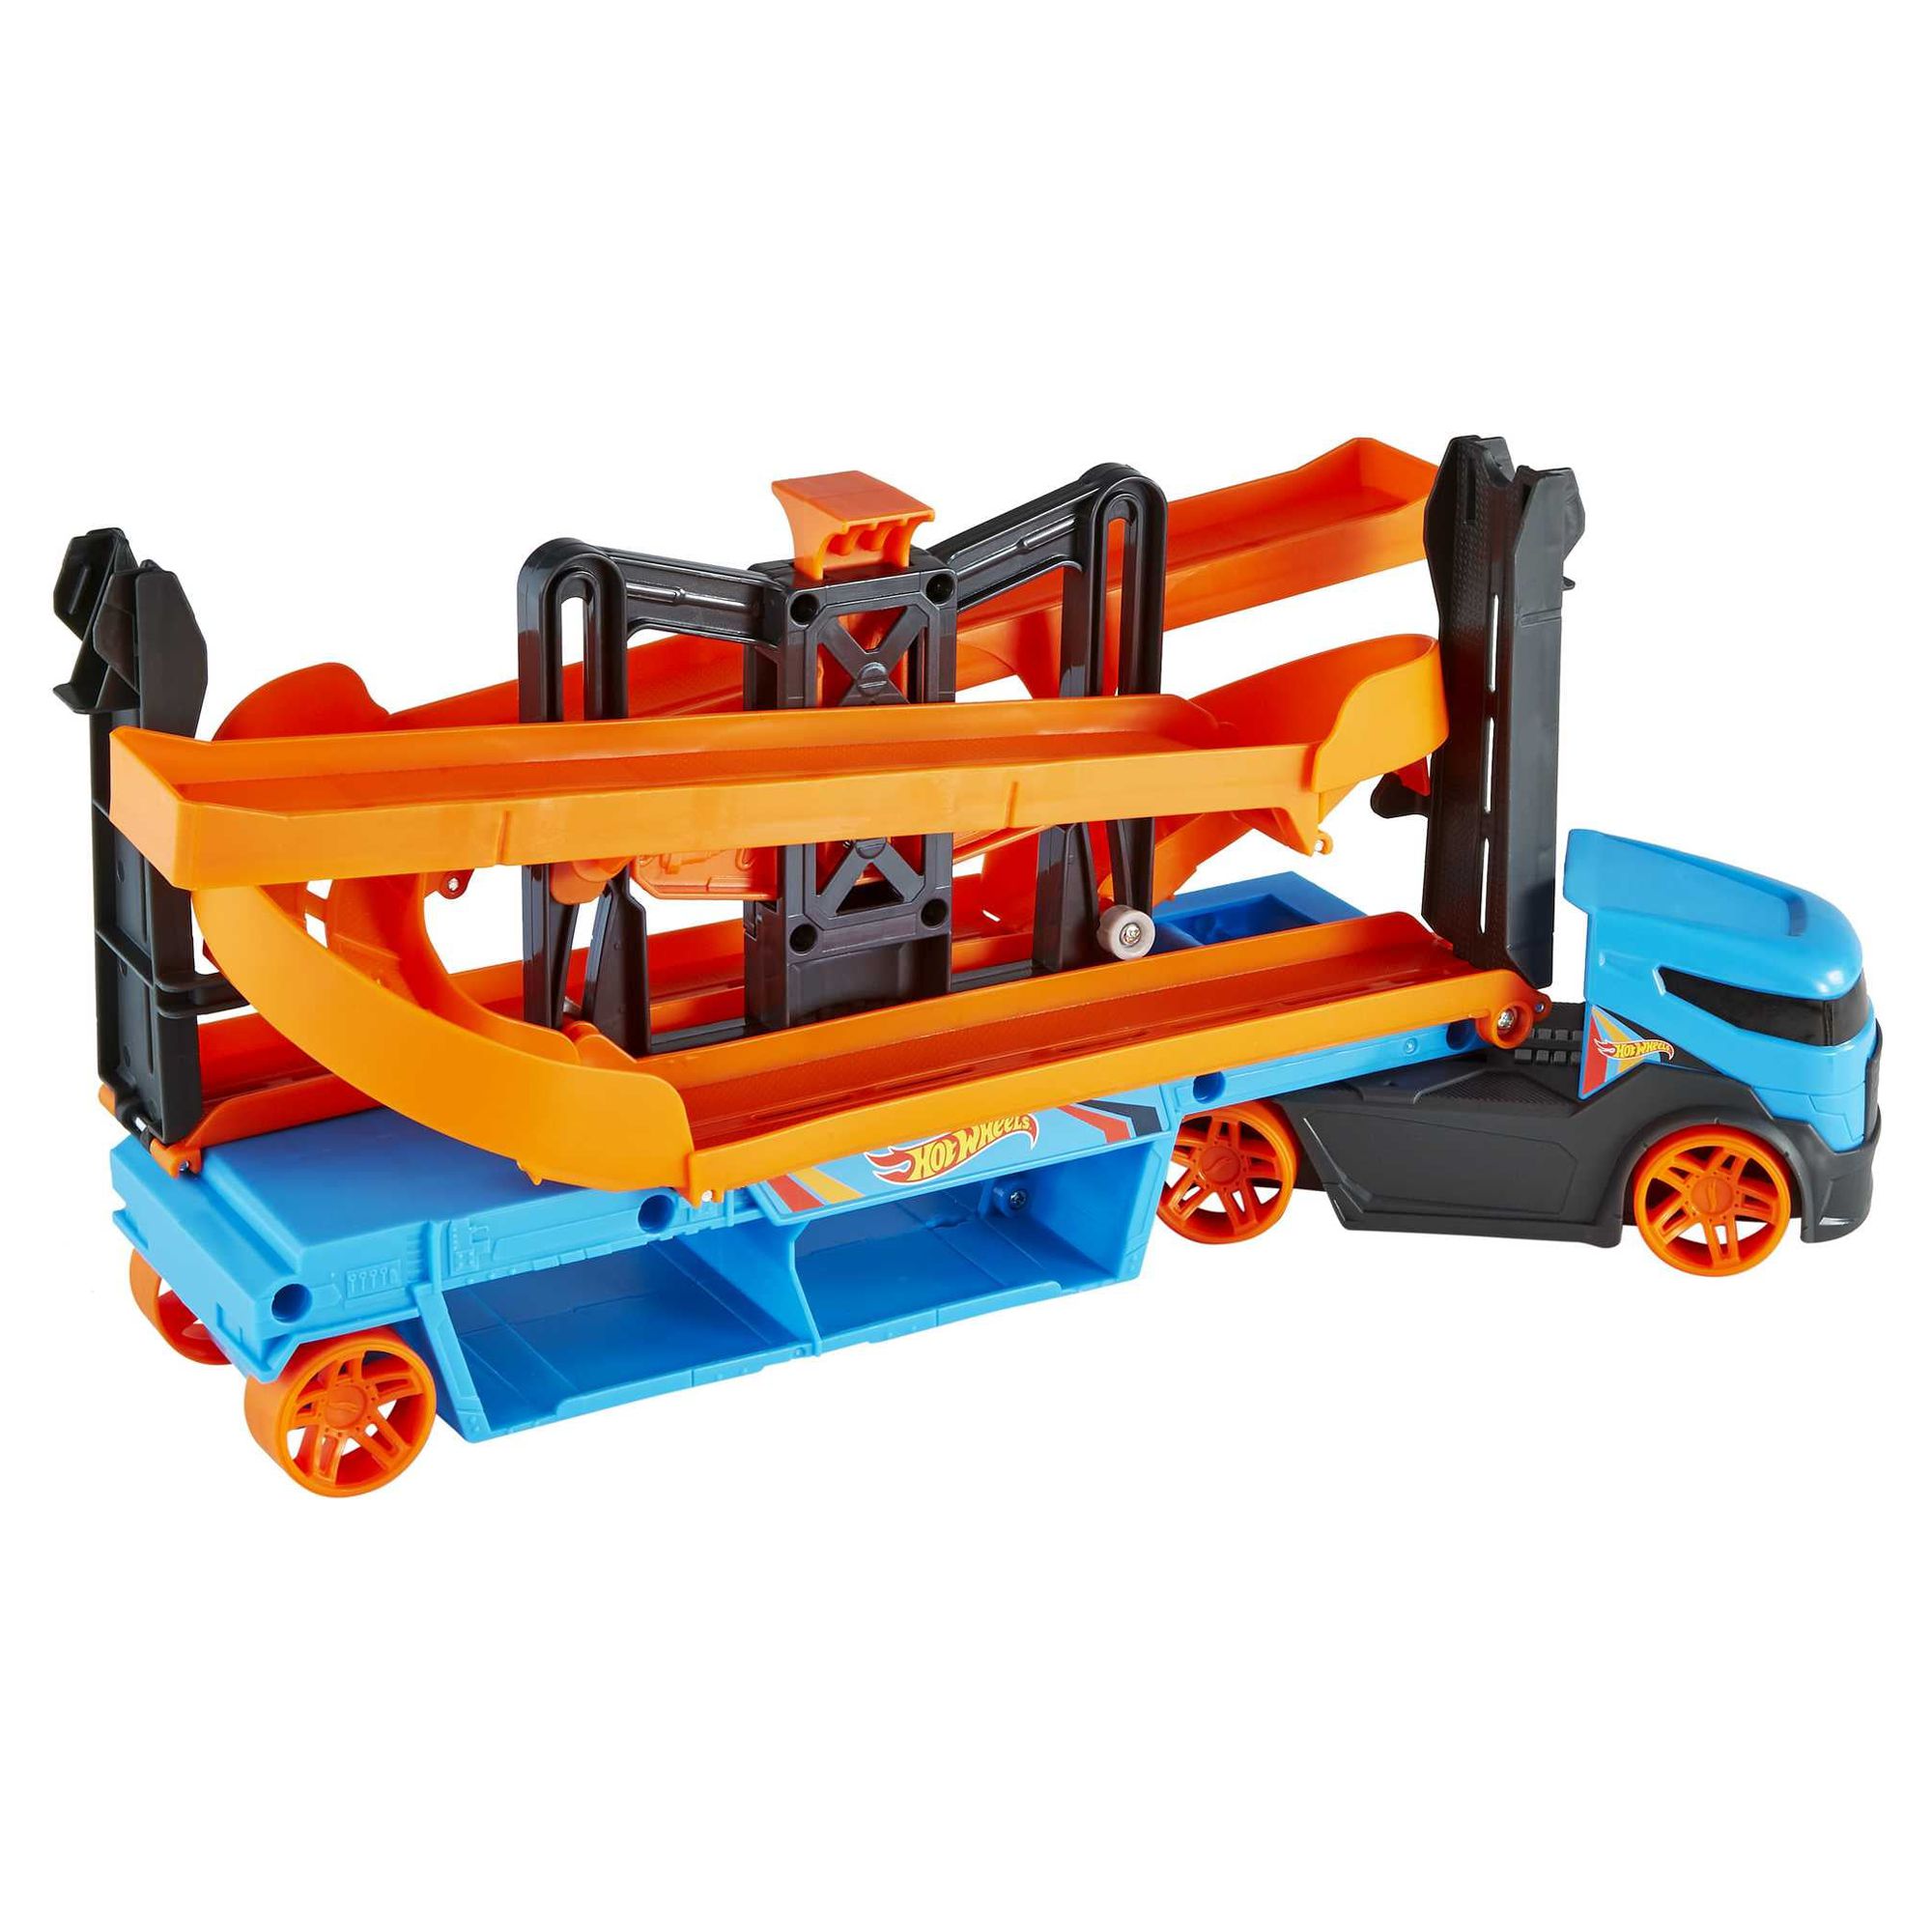 Hot Wheels Lift & Launch Hauler Toy Truck with 10 Cars in 1:64 Scale, Transporter Stores 20 Vehicles - image 3 of 6